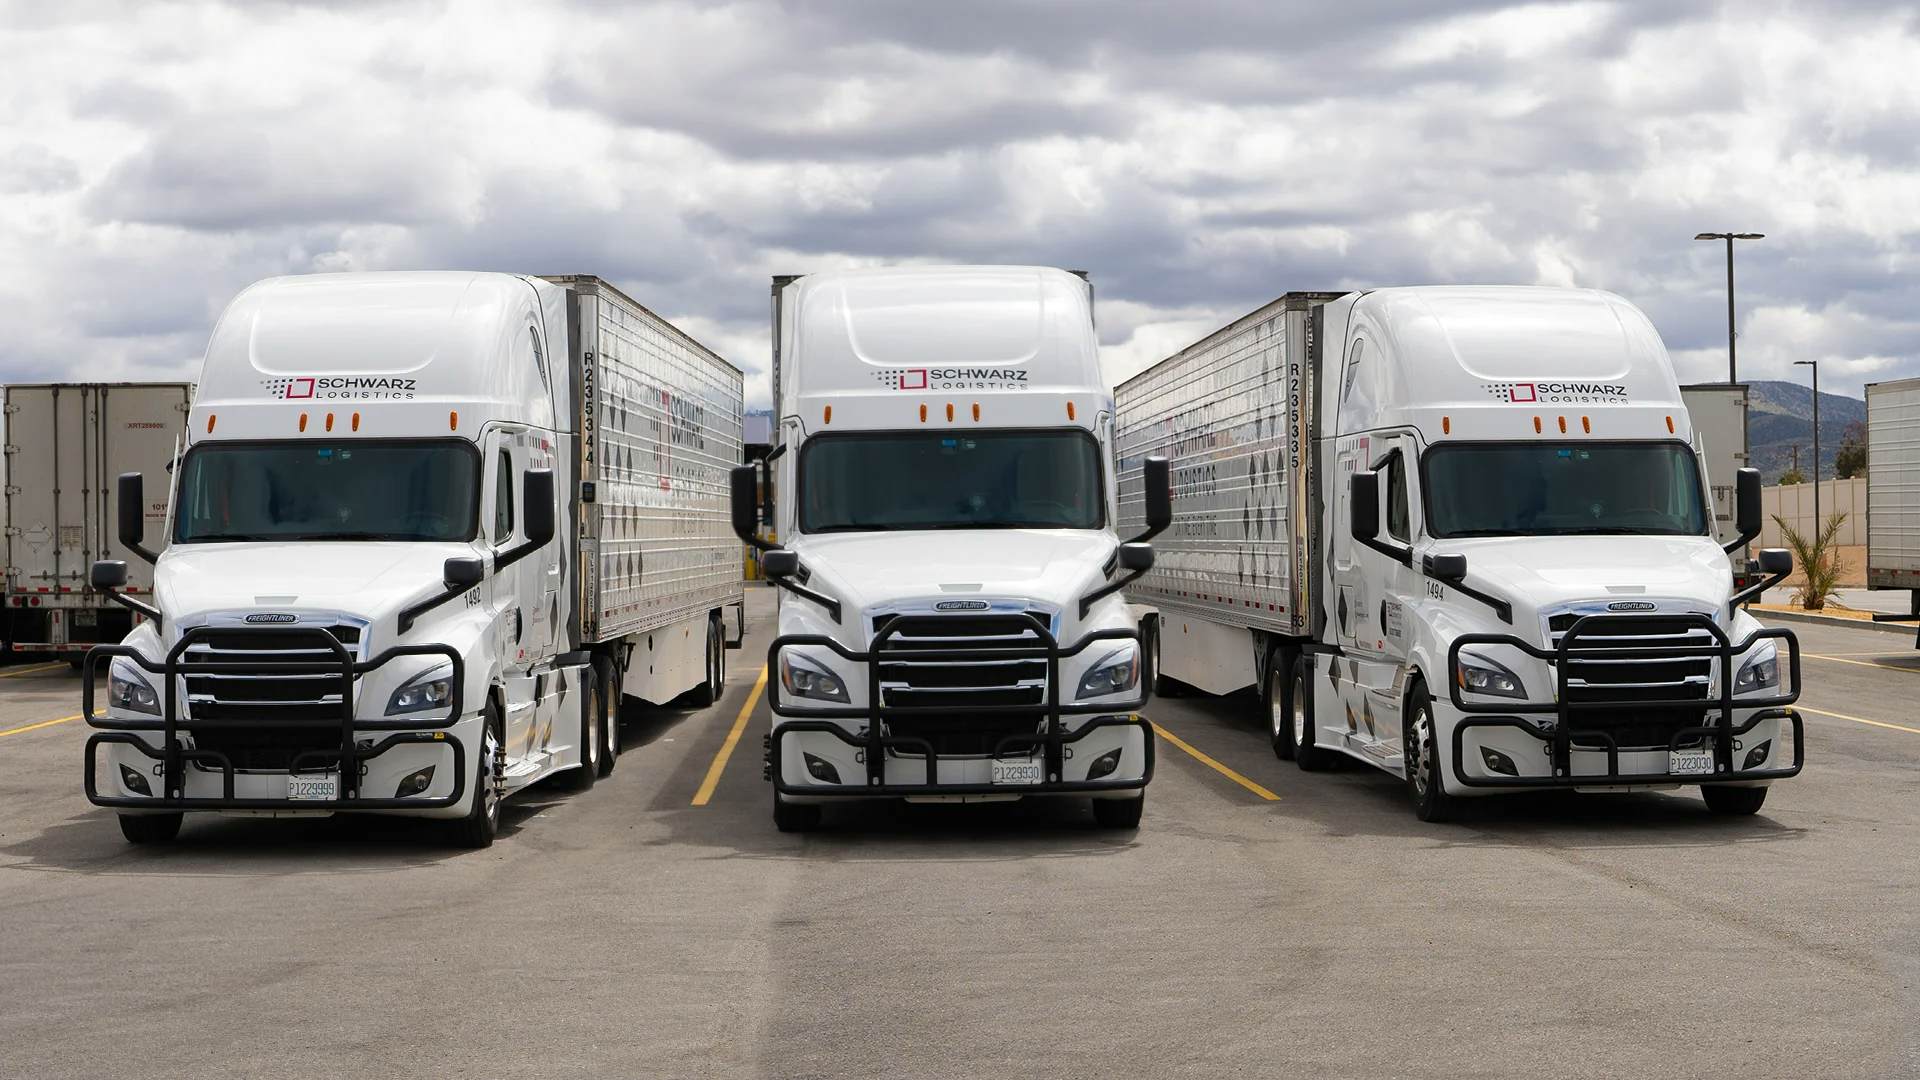 Three large white semi-trailer trucks parked side by side at a truck stop, each branded with 'SCHWARZ LOGISTICS' on the trailer. The middle truck faces forward, while the other two are angled away, creating a symmetrical pattern against an overcast sky with hills in the distance, emphasizing the fleet's readiness for transport.